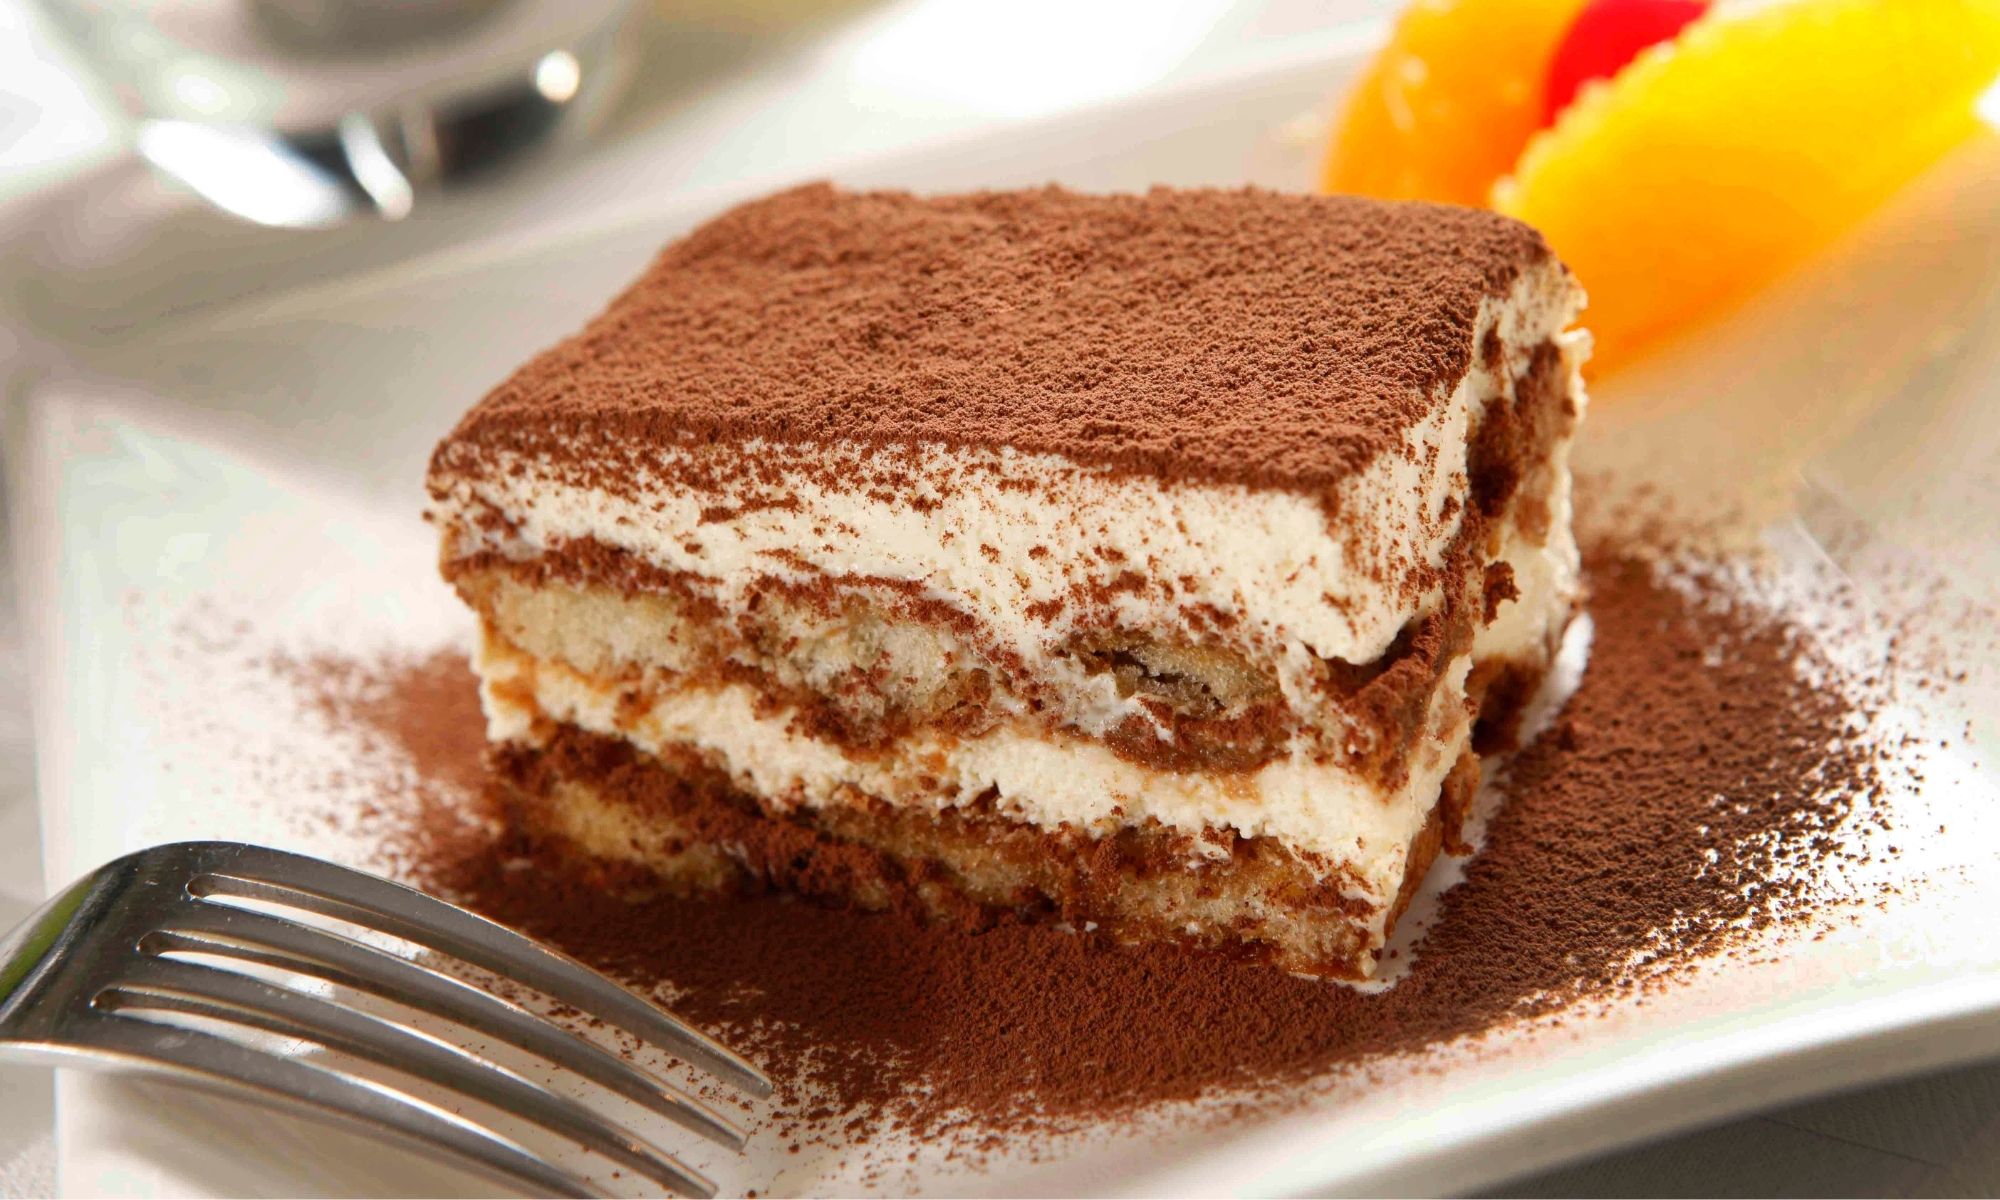 The “true” good of where story find Berlin) one Tiramisu, to the dessert in iconic Italian a (and